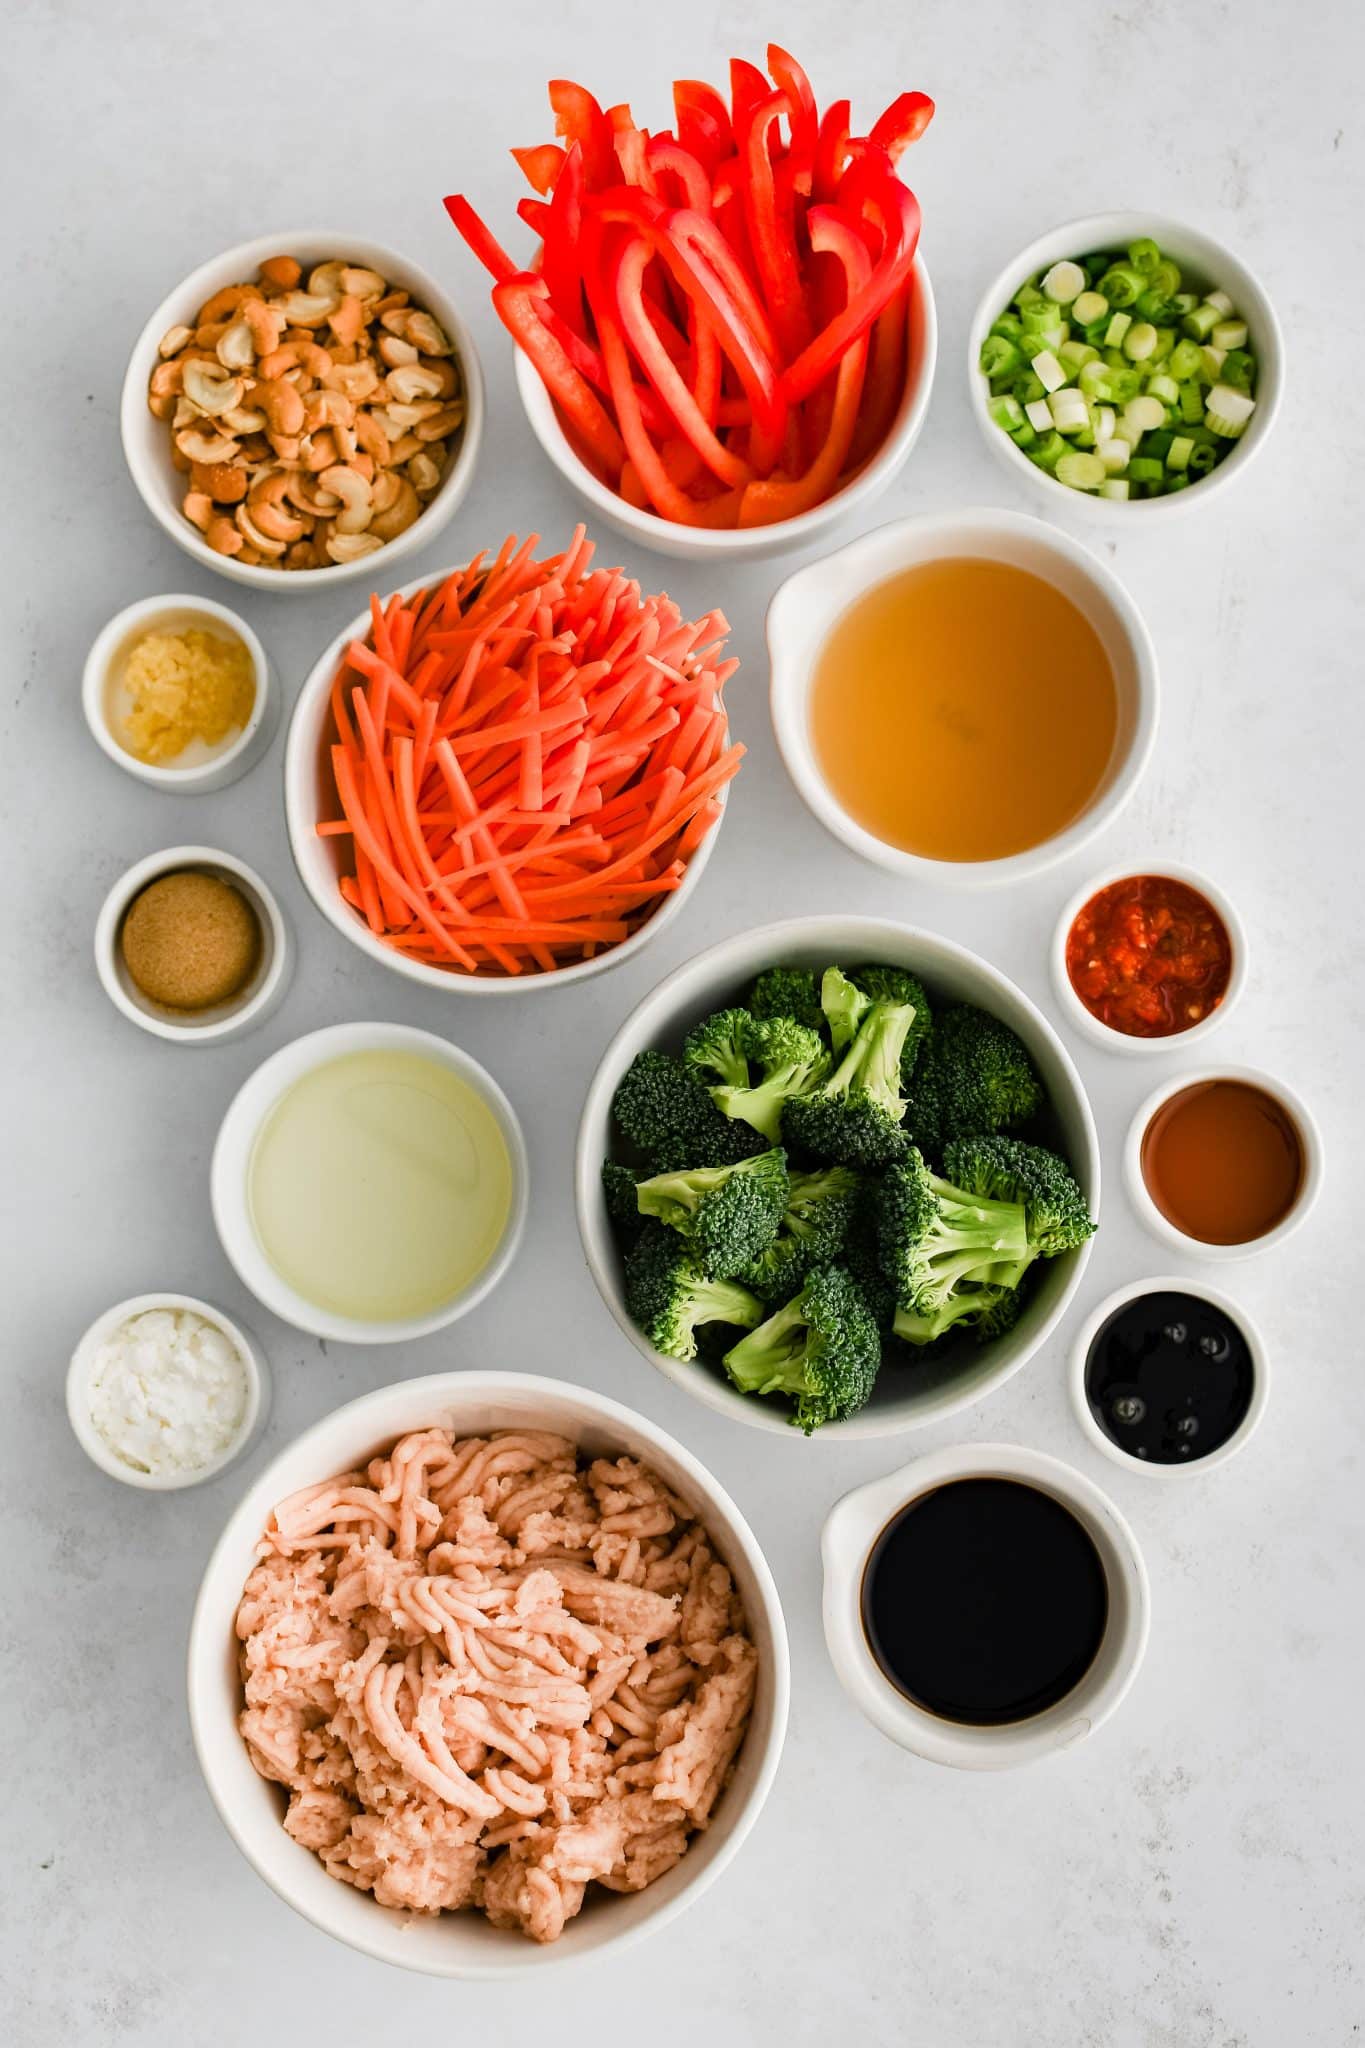 All of the ingredients for ground chicken stir fry recipe presented in individual measuring cups and ramekins.